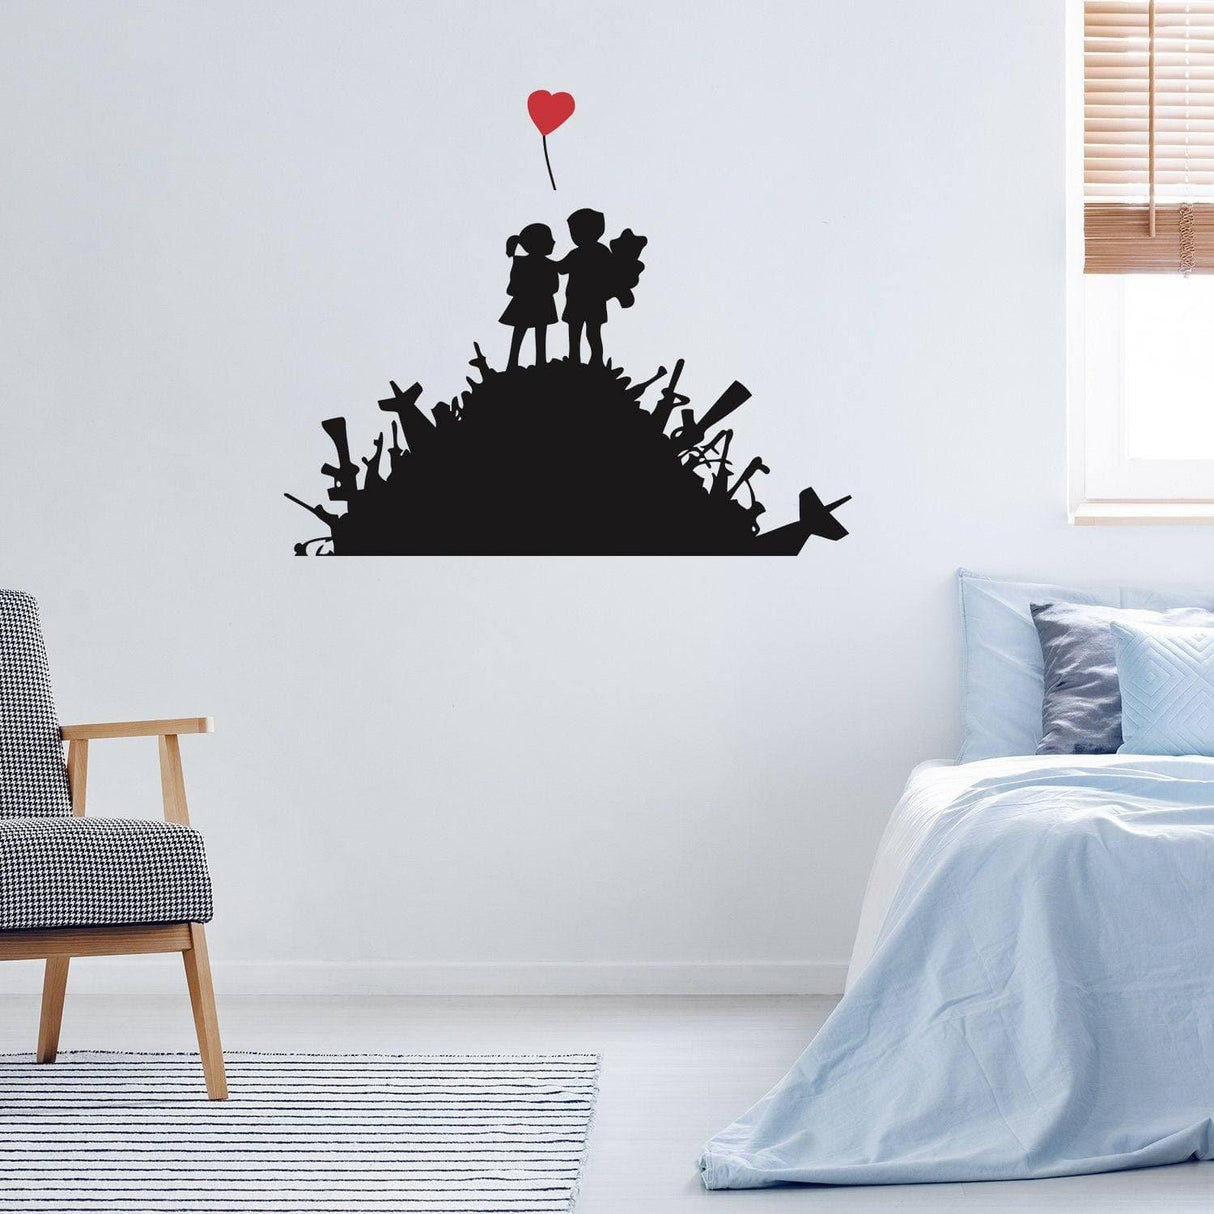 Banksy Boy And Girl Friend Wall Sticker - Kid With A Child Art Balloon Decor Room Street Graffiti Decal - Bank Ash Home Room Mural - Decords